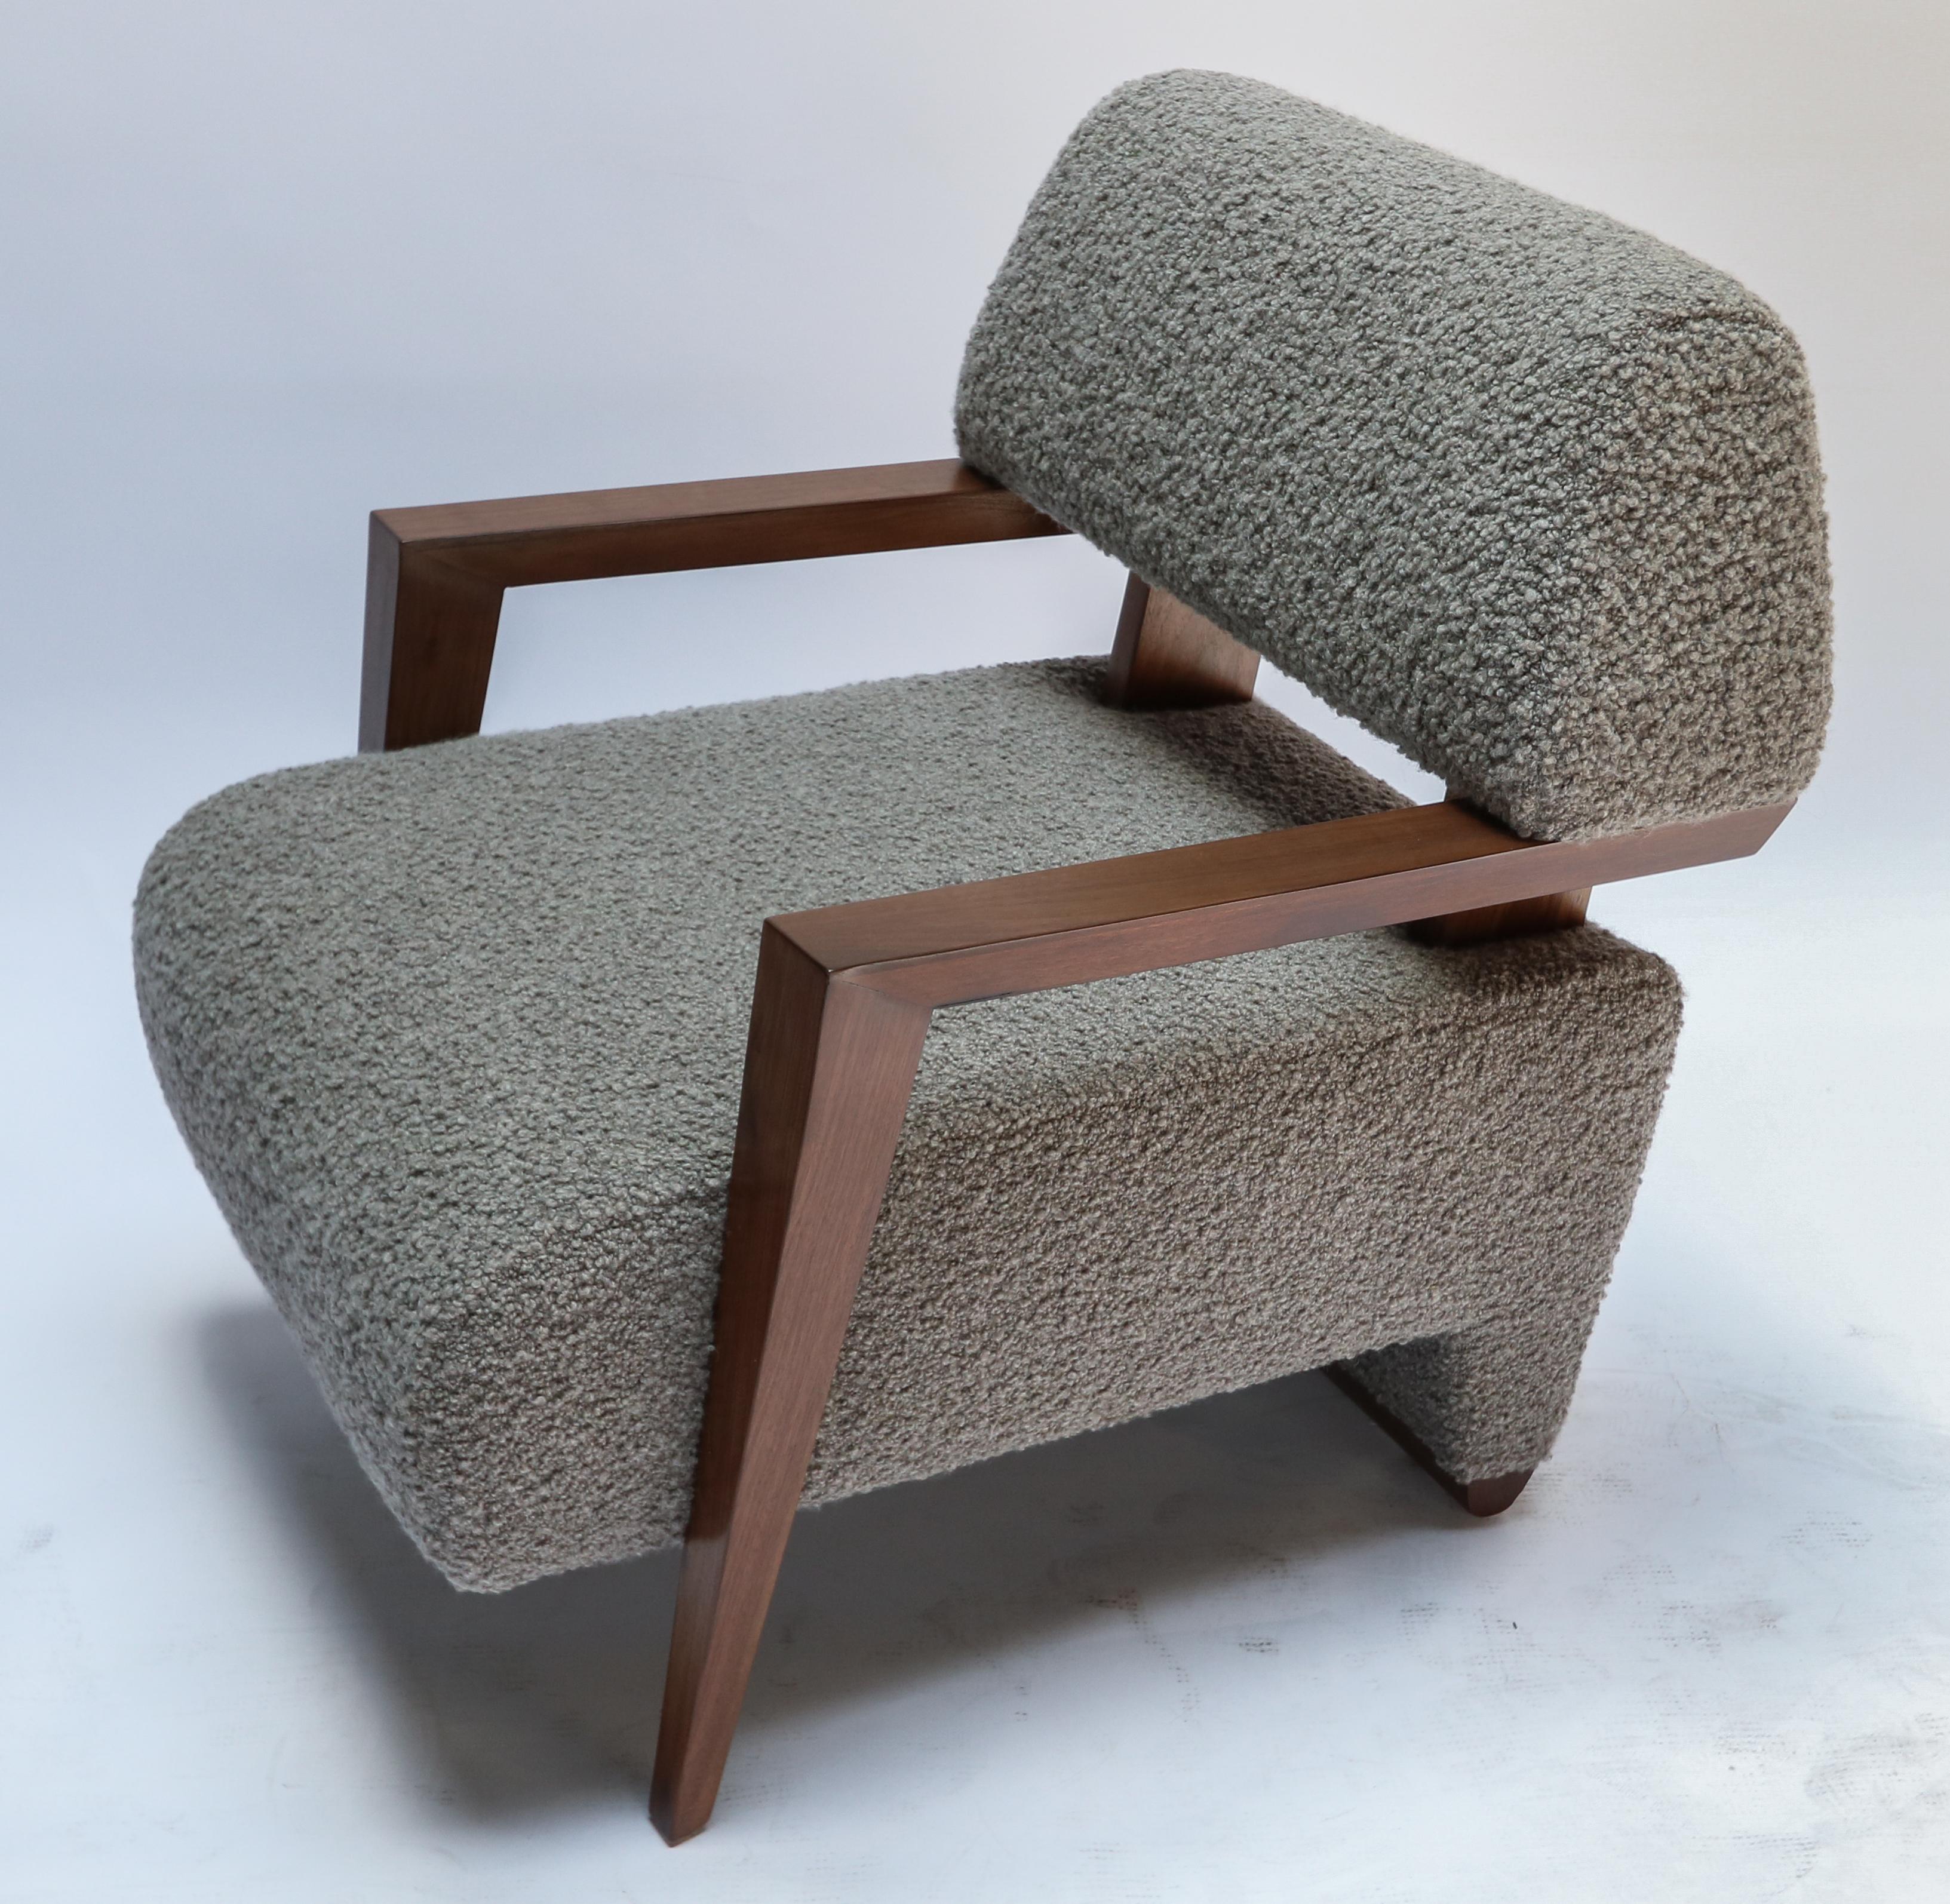 Pair of custom Art Deco mid century style American walnut armchairs upholstered in grey alpaca bouclé.  Made in Los Angeles by Adesso Imports. Can be done in different wood and fabrics.